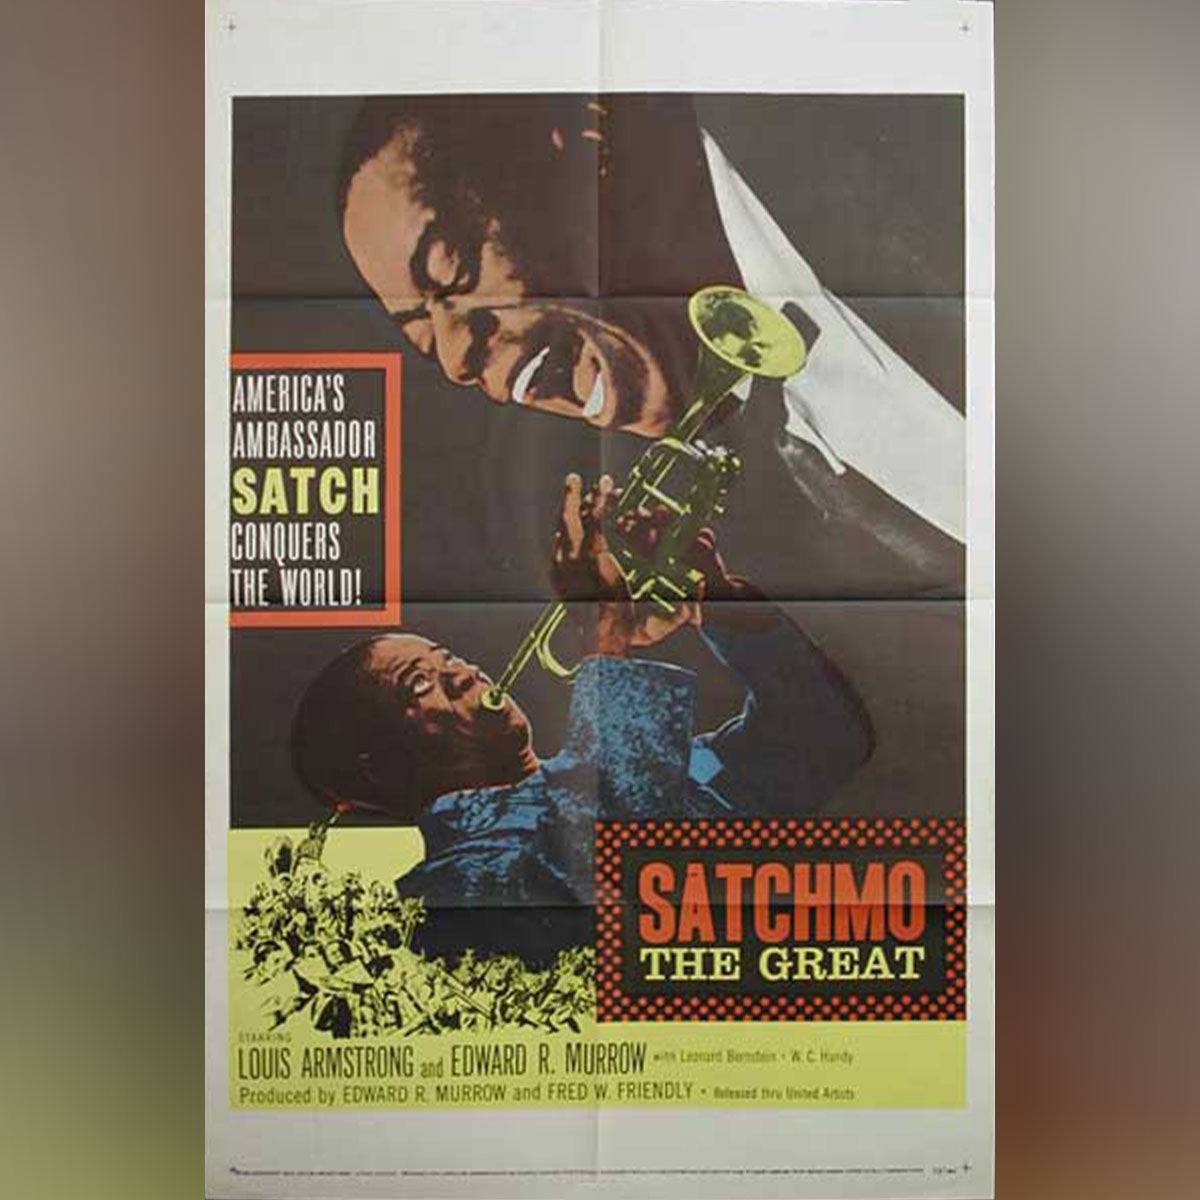 Satchmo The Great (1957)